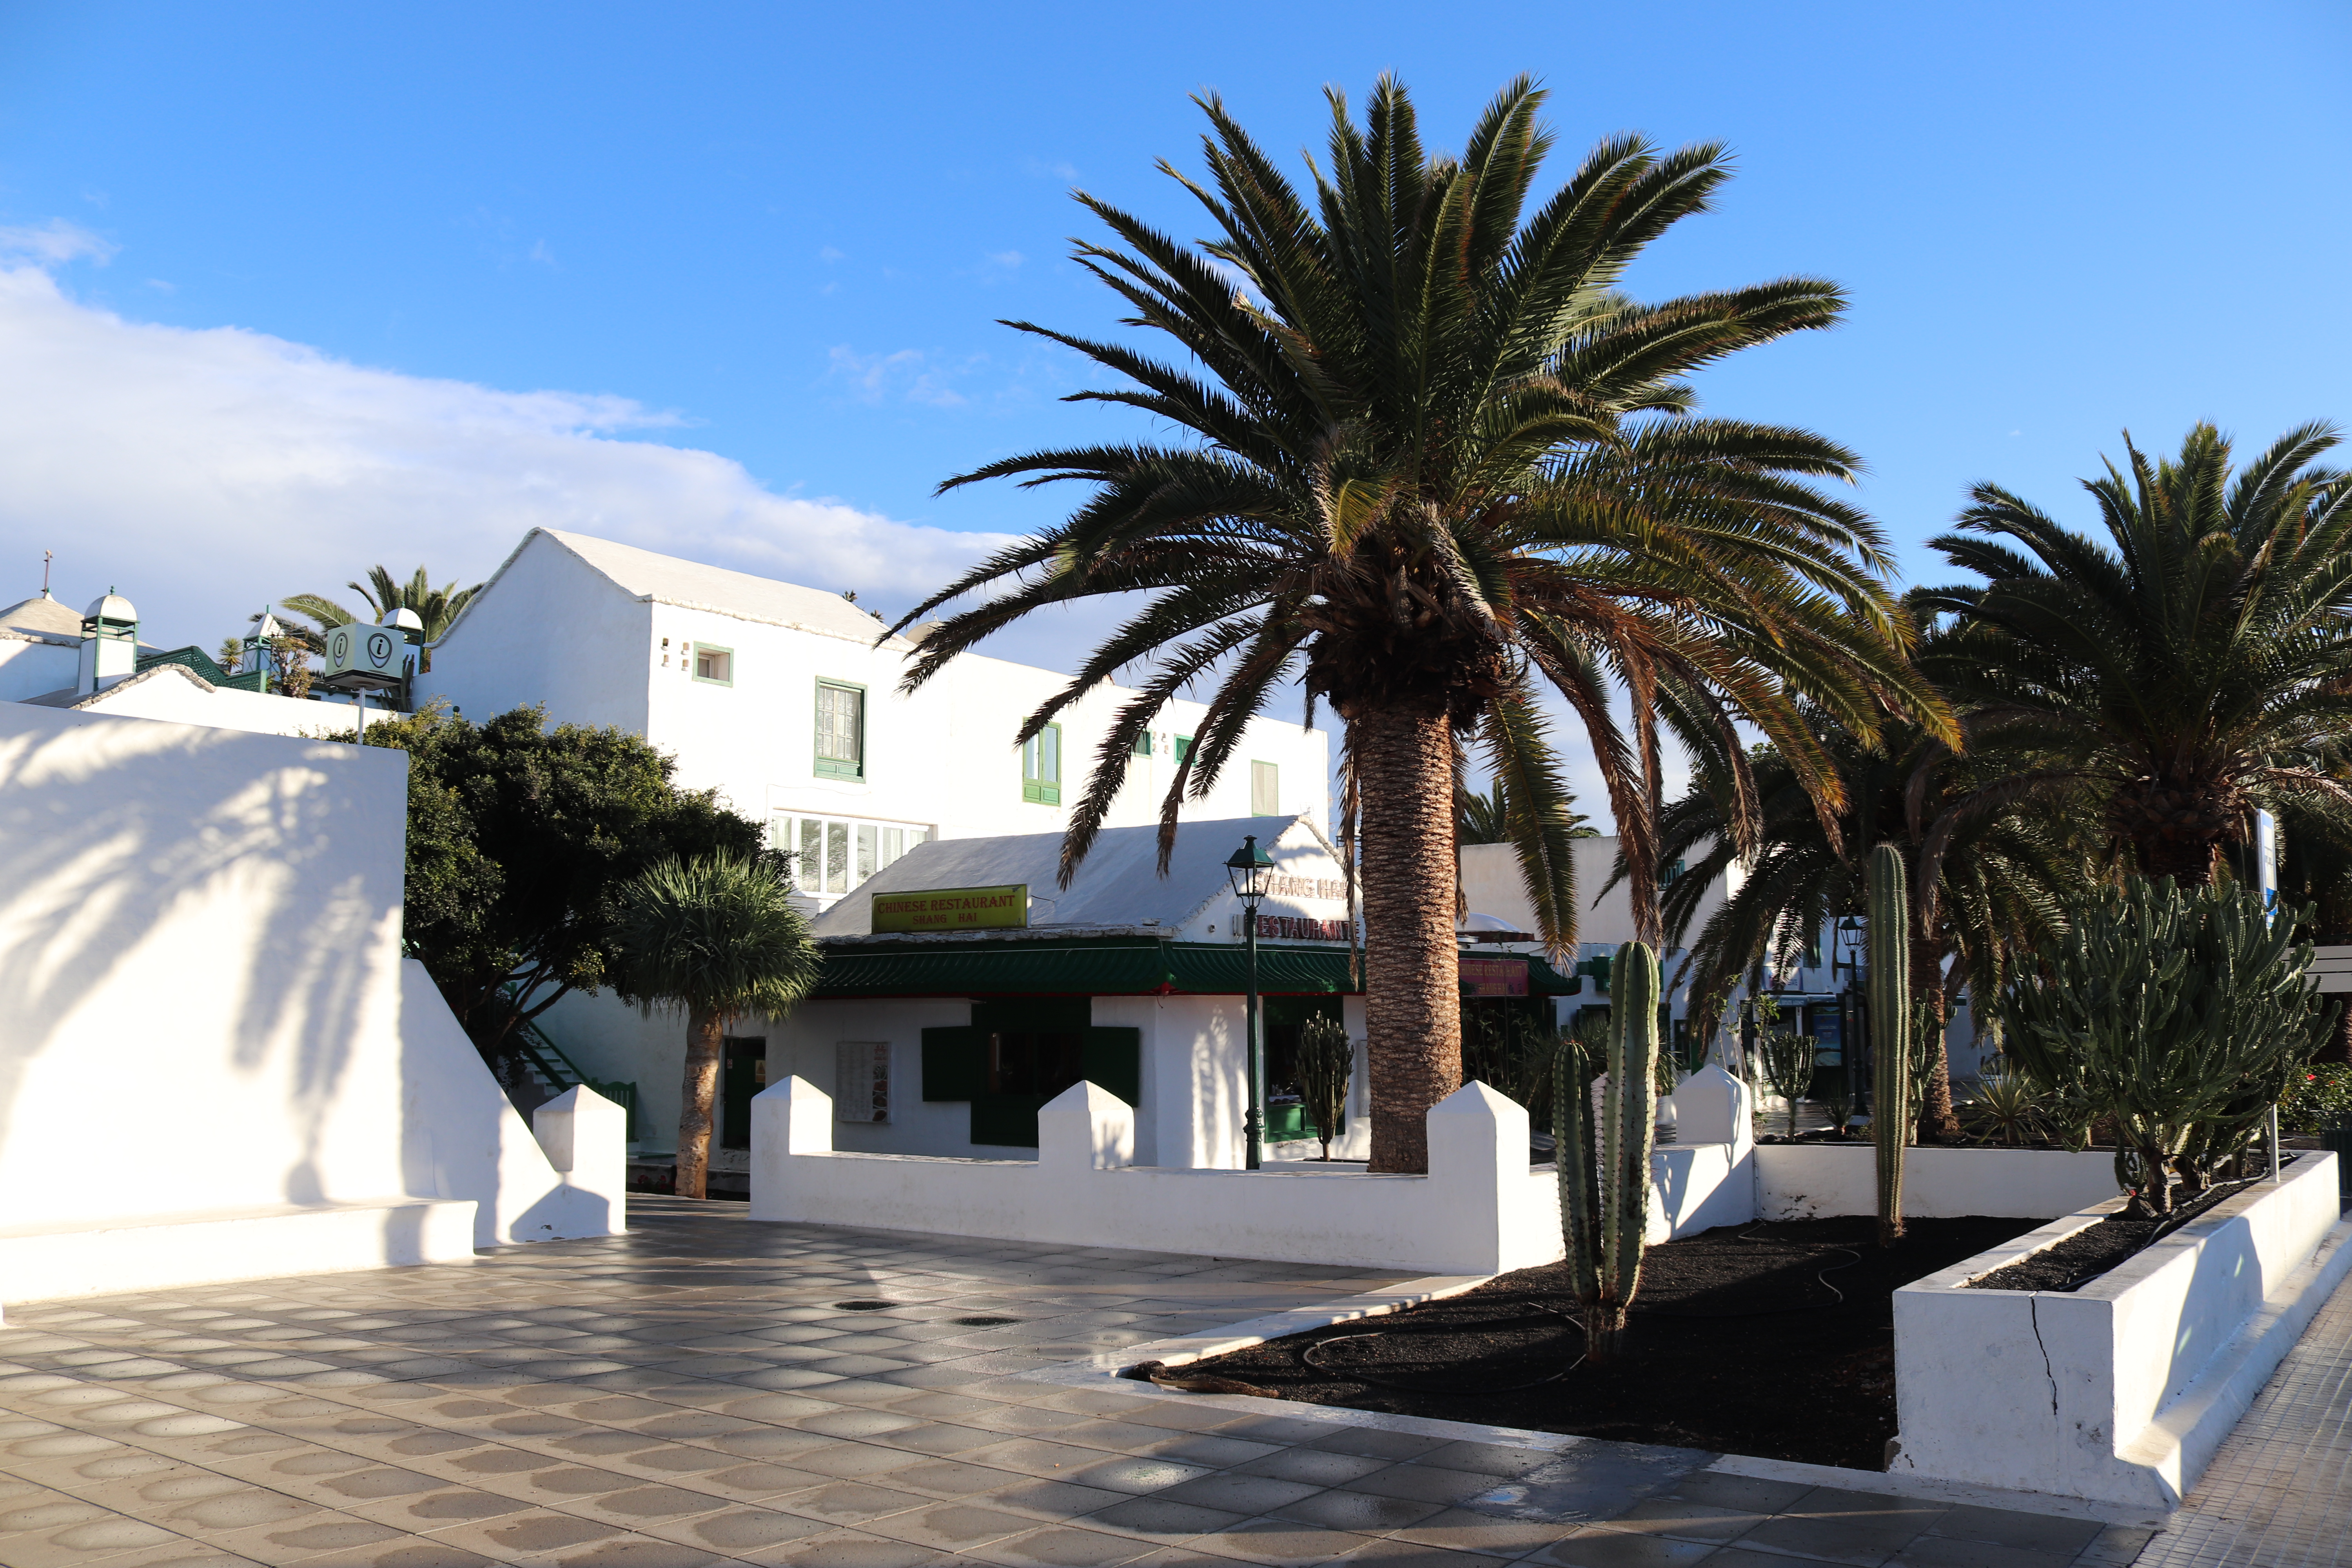 A view of palm trees in the Costa Teguise, Lanzarote